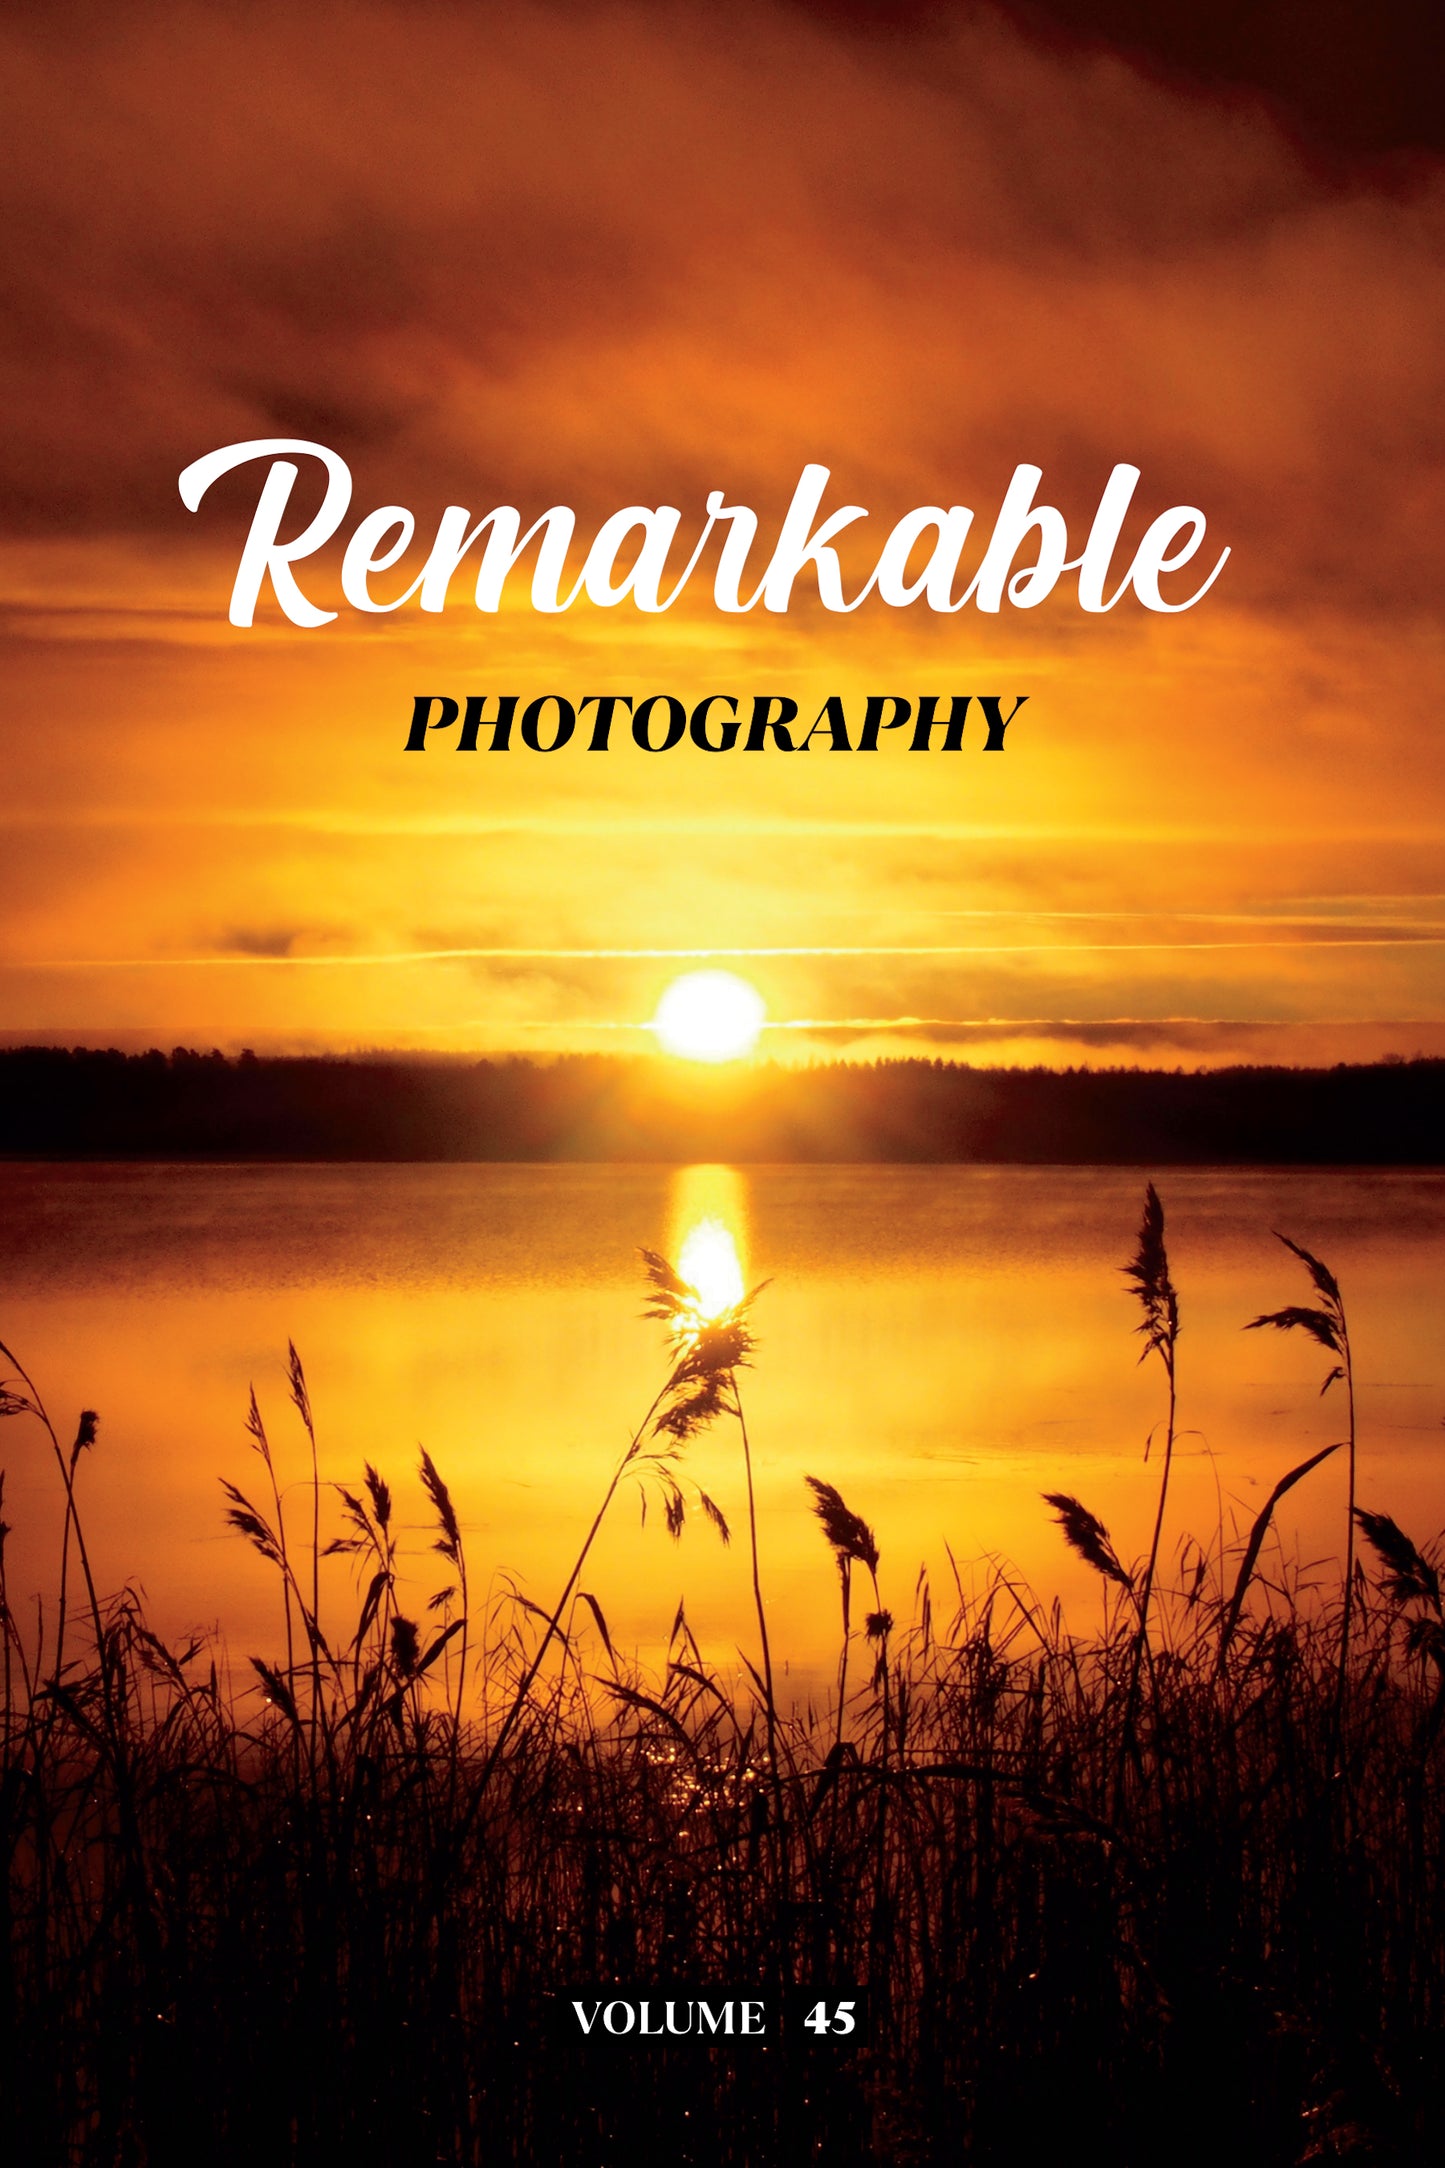 Remarkable Photography Volume 45 (Physical Book Pre-Order)